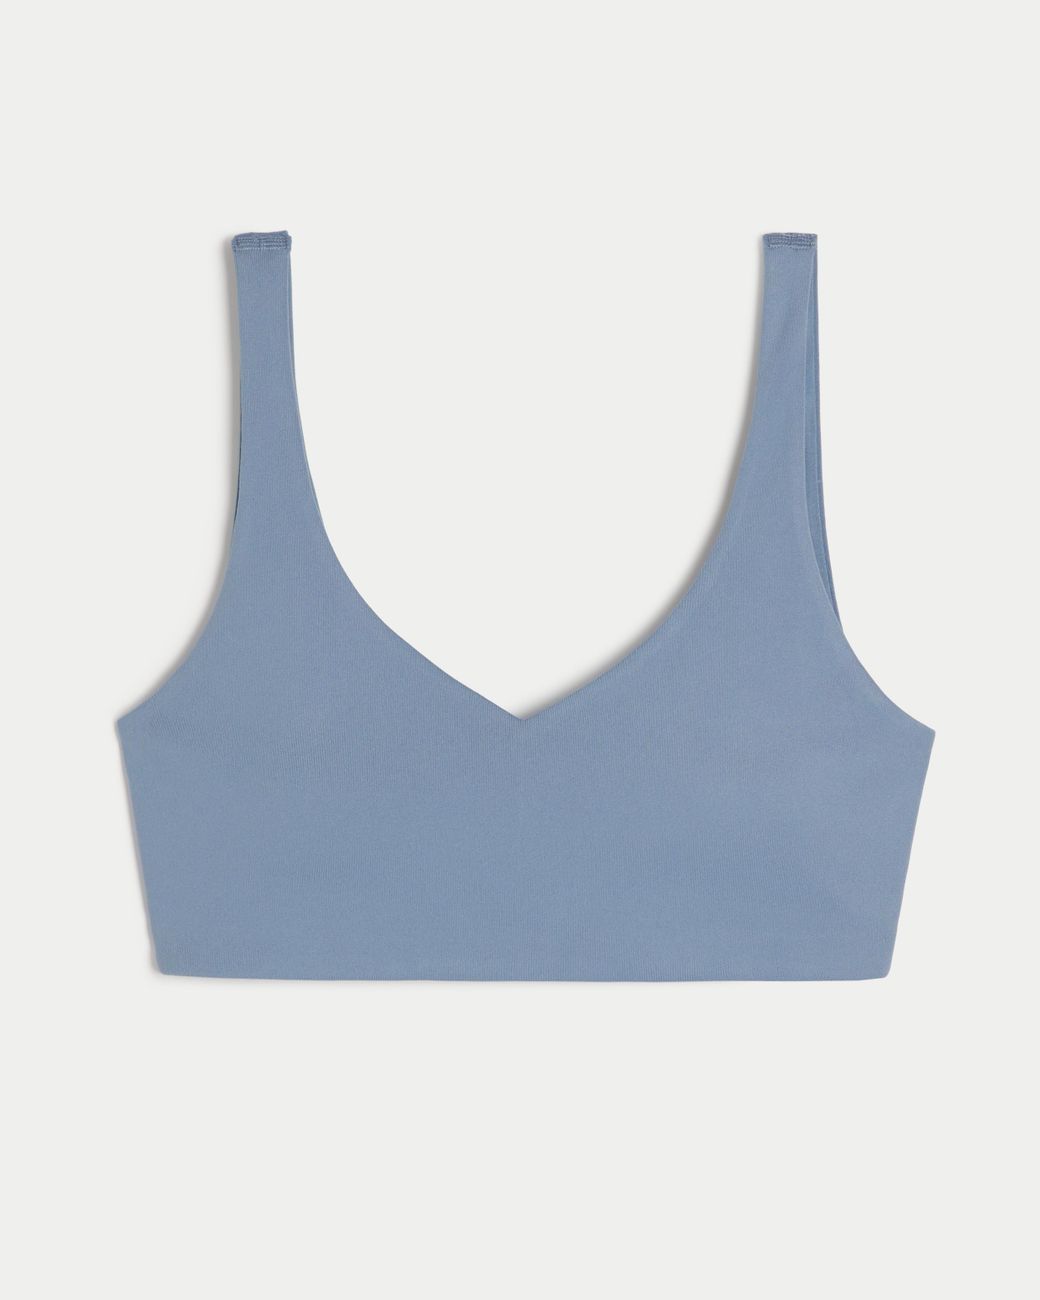 Hollister Gilly Hicks Active Recharge Plunge Sports Bra